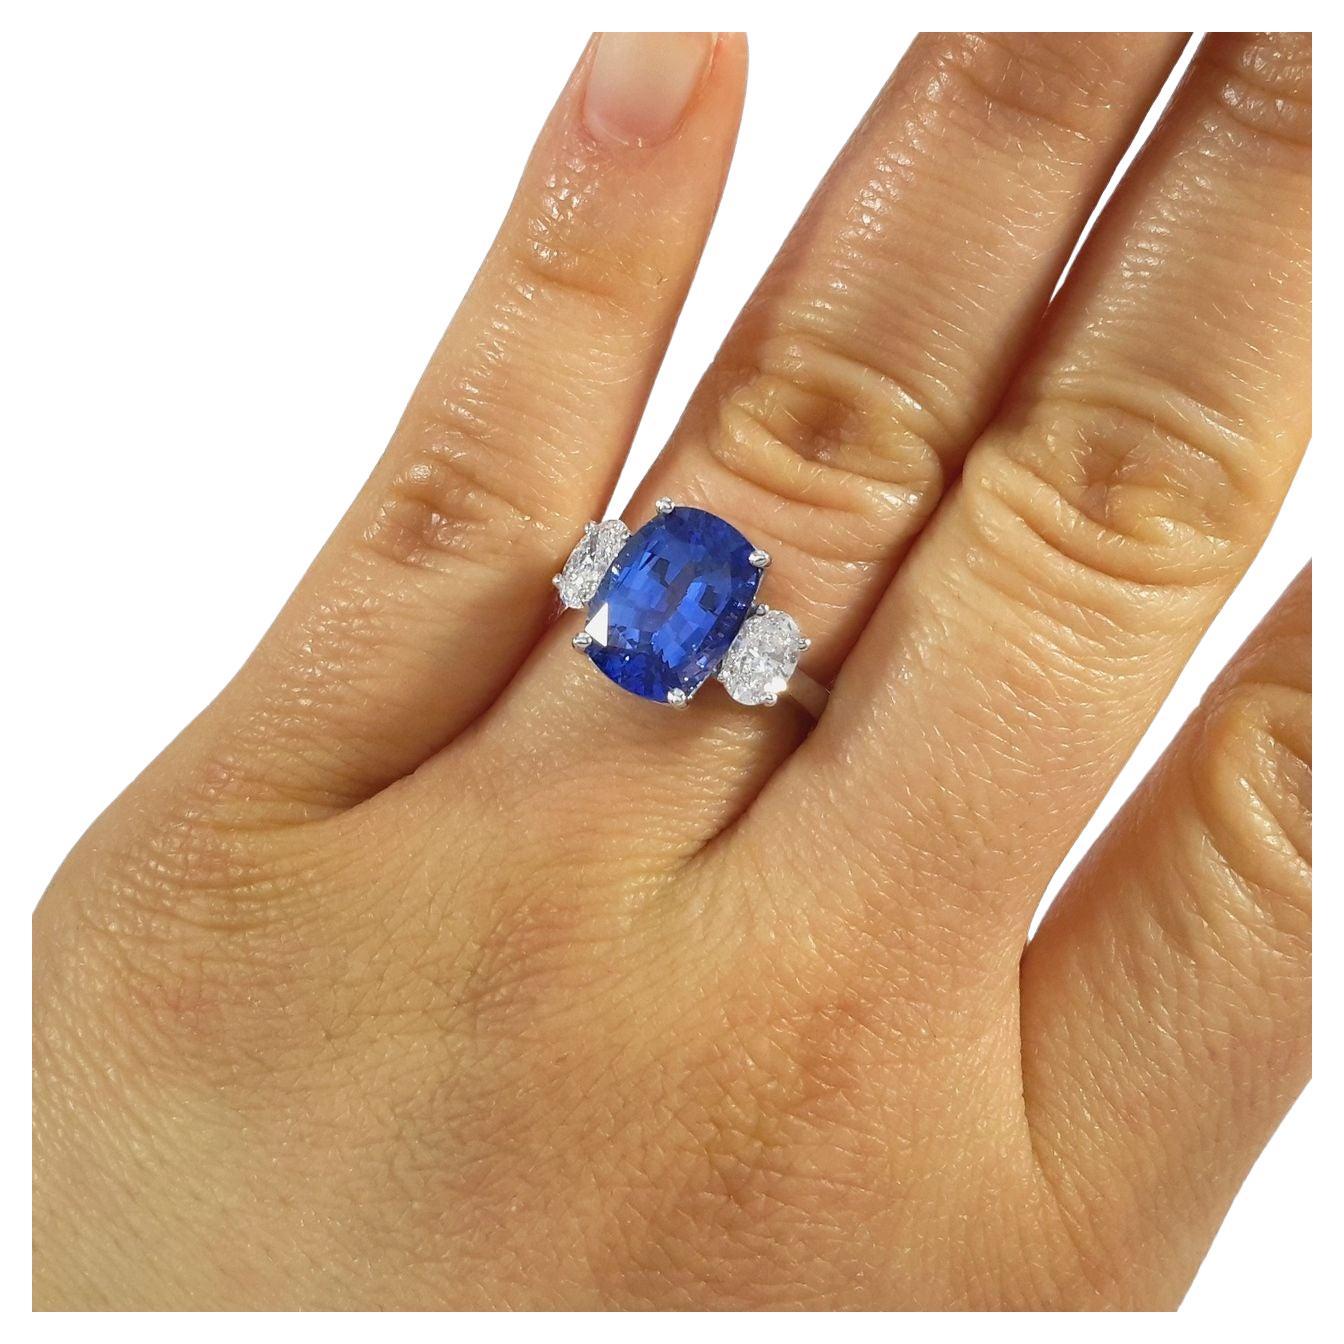 This exquisite 5 carat blue sapphire cushion-cut diamond ring features a stunning center stone that is GIA certified, ensuring its quality and authenticity. The sapphire's intense blue hue is mesmerizing and is further enhanced by its cushion cut,